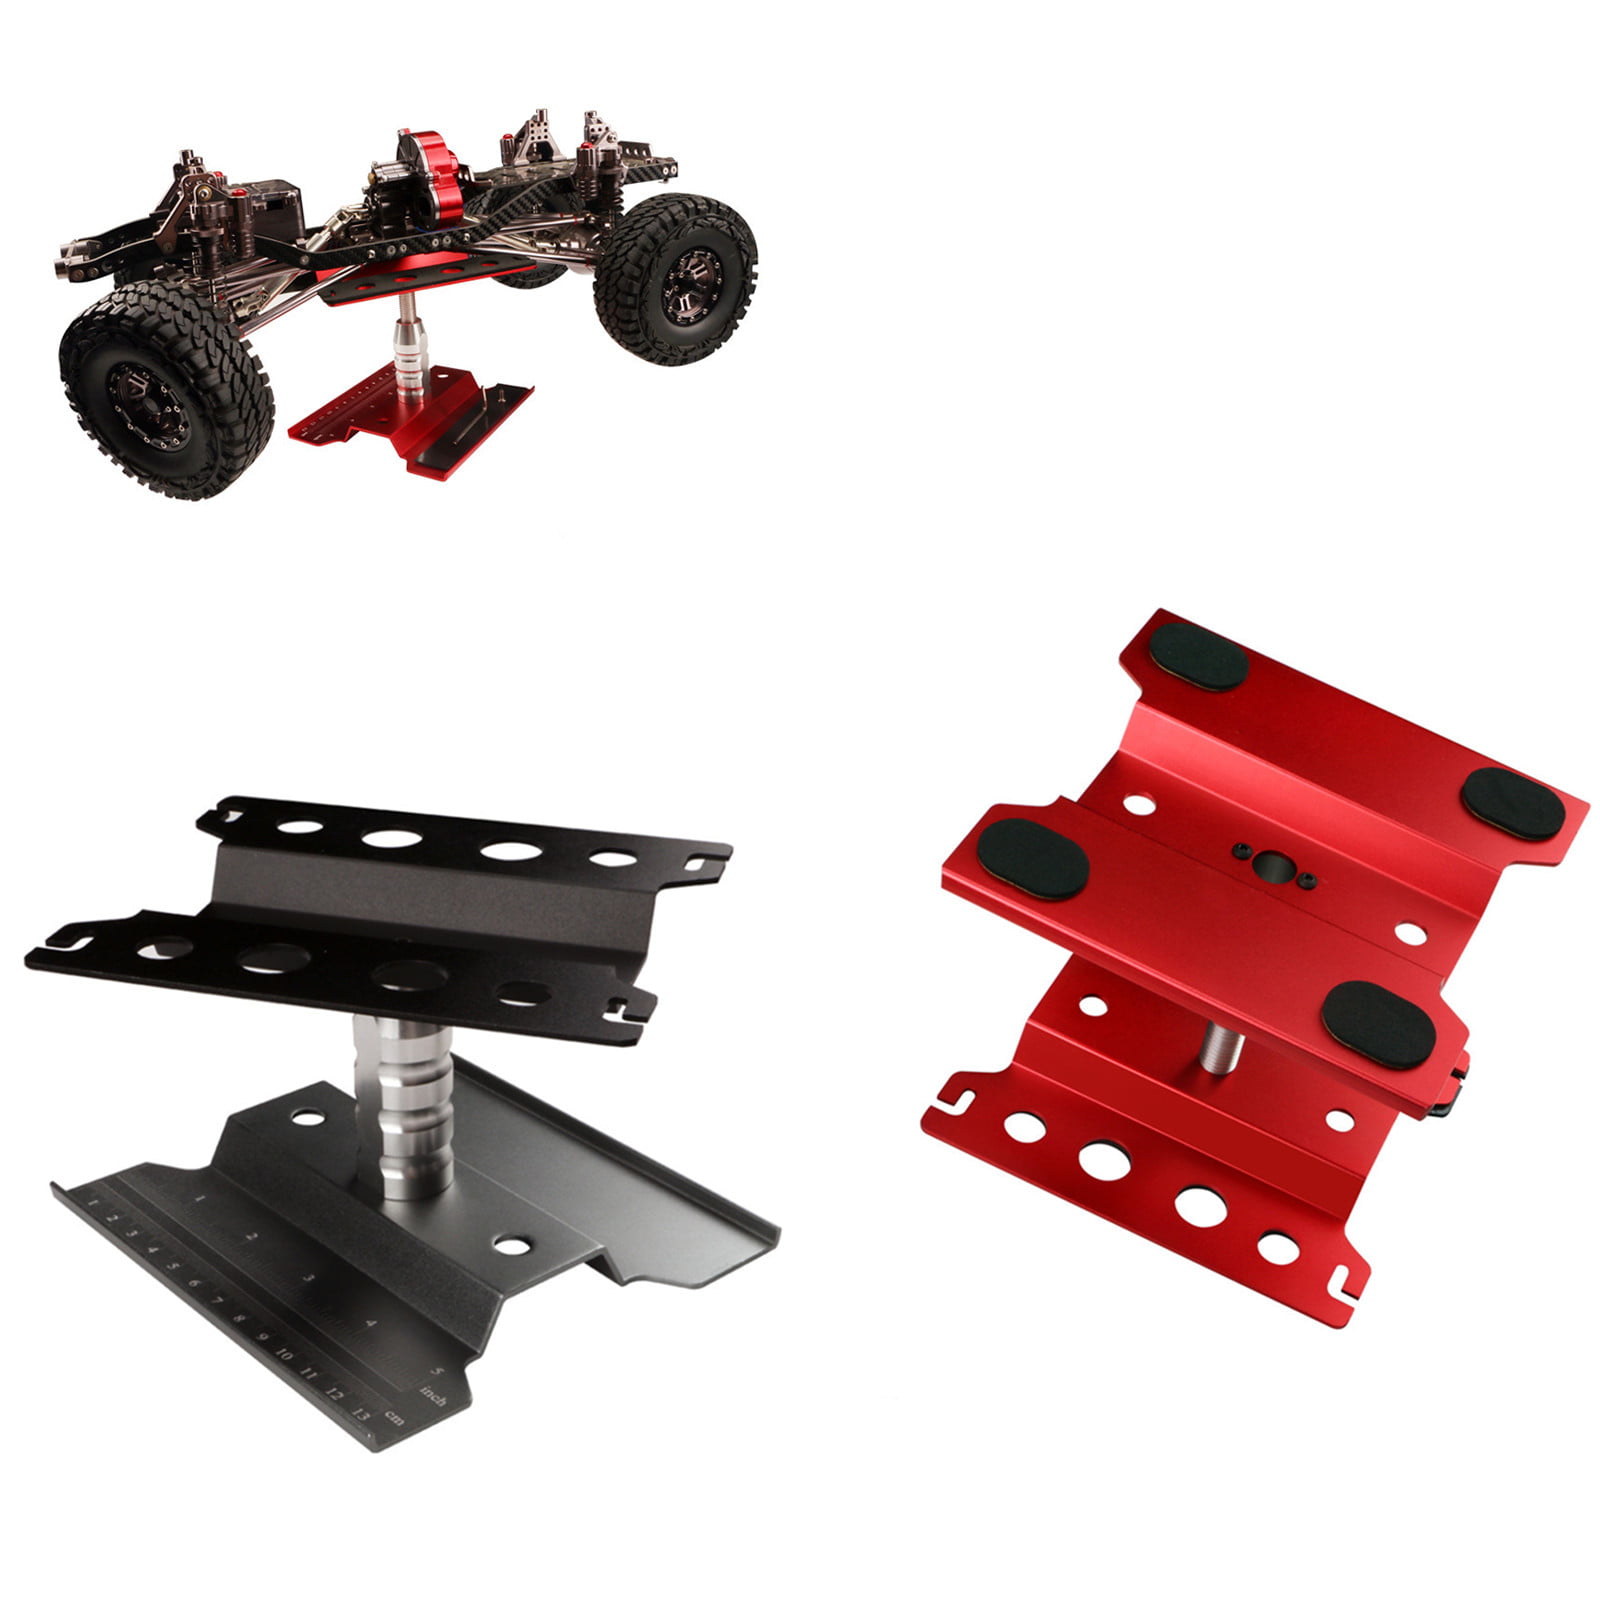 Red RC Car Work Stand Repair Workstation Aluminum Alloy Hobby Tools for 1/10 